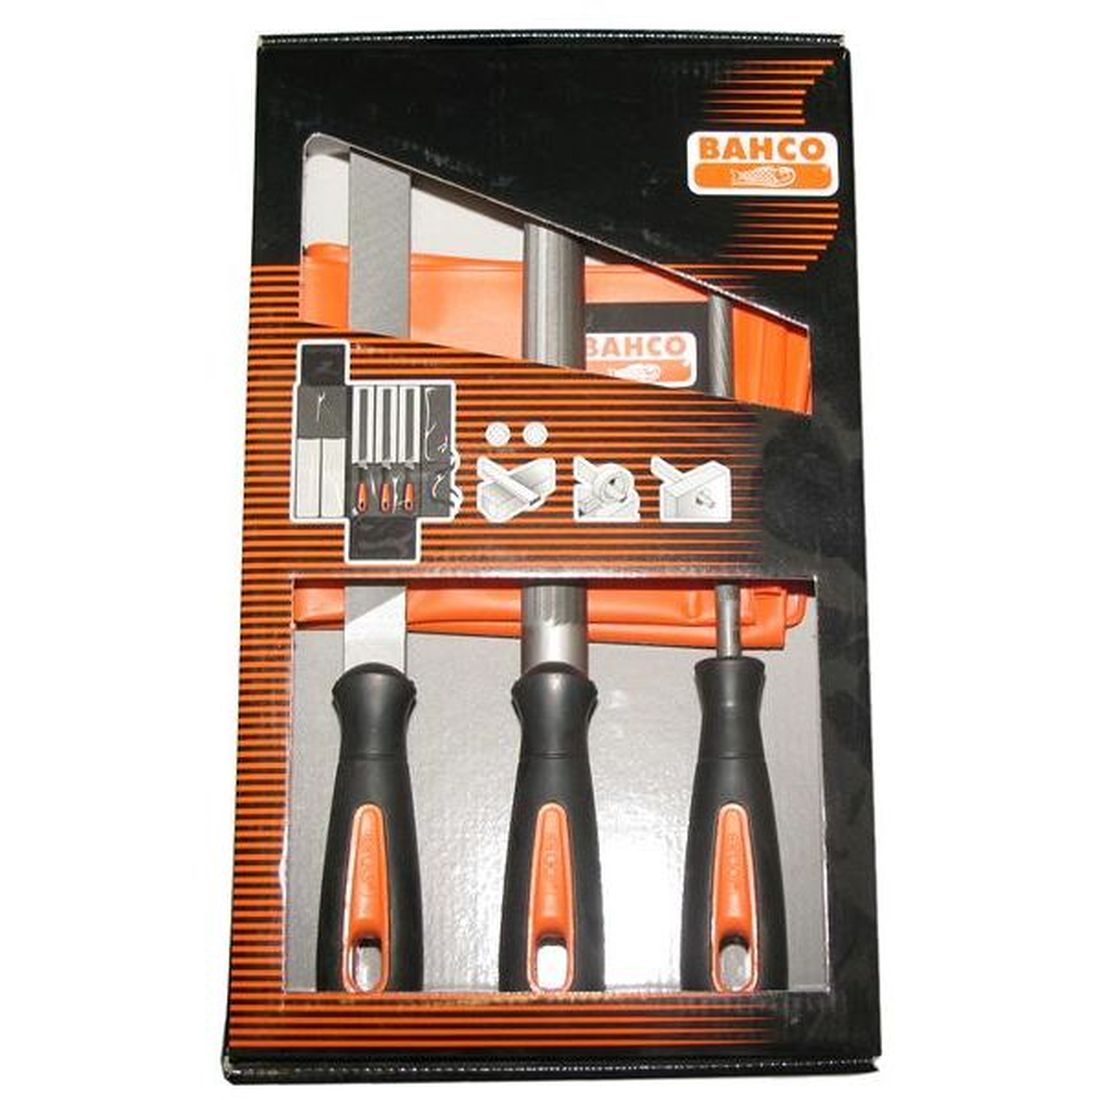 Bahco 200mm (8in) ERGO Engineering File Set, 3 Piece                                 